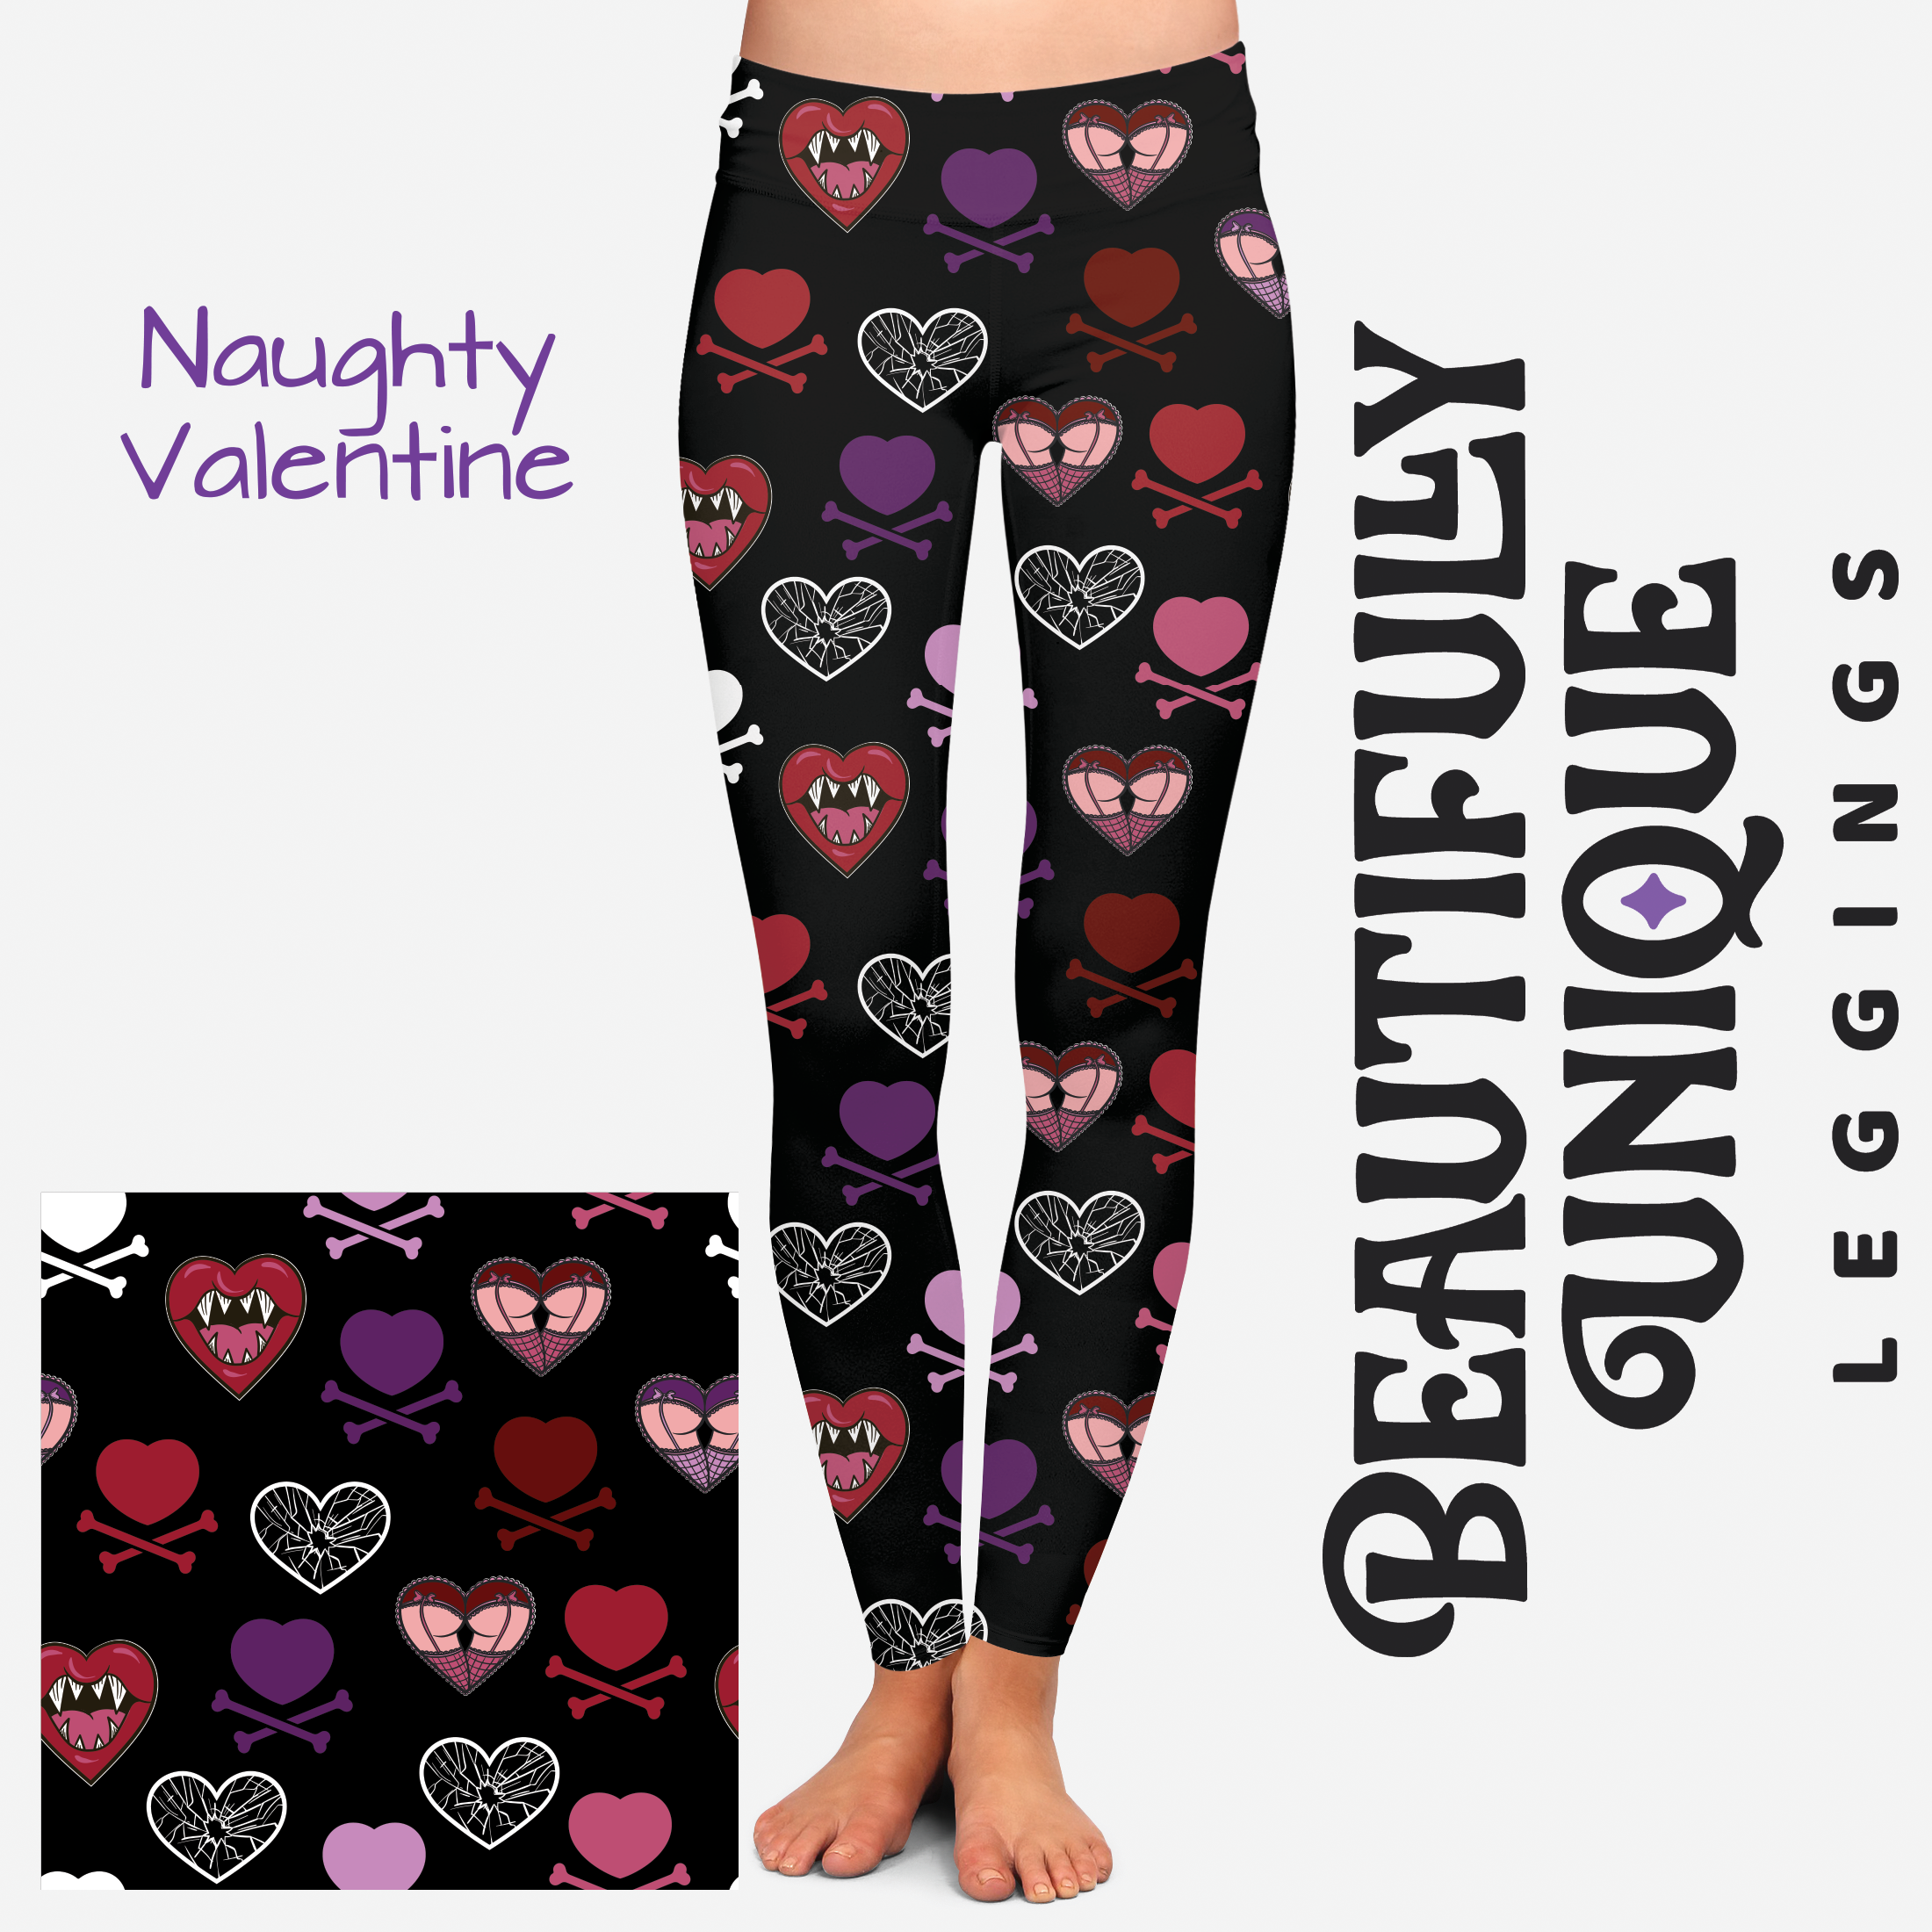 Cool Wholesale womens valentine leggings In Any Size And Style - Alibaba.com